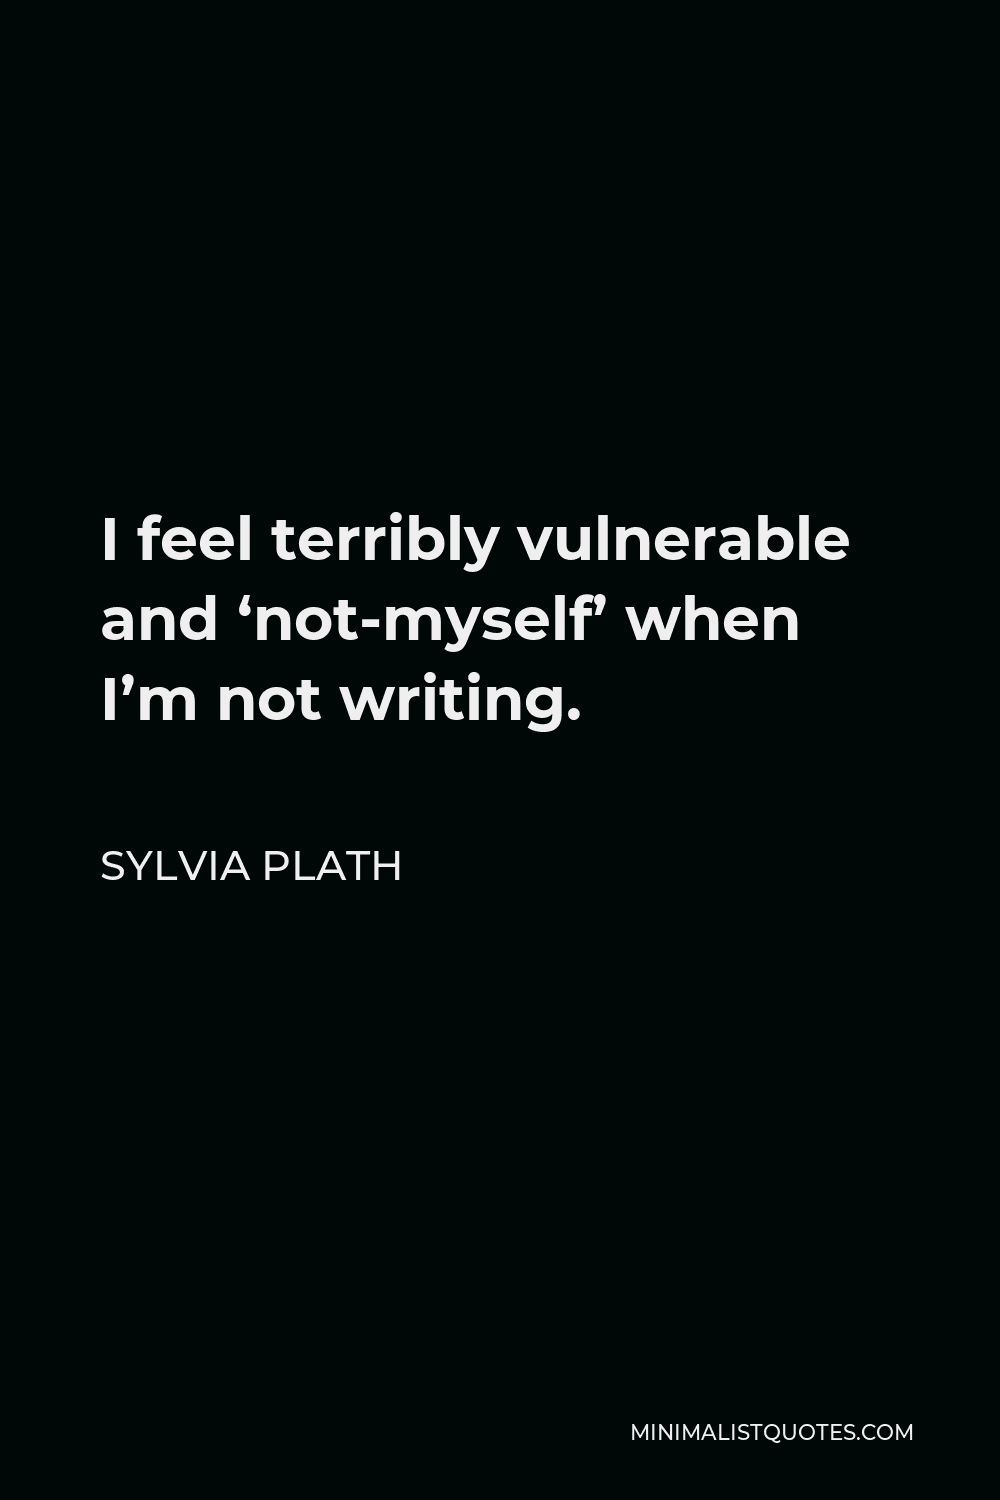 Sylvia Plath Quote - I feel terribly vulnerable and ‘not-myself’ when I’m not writing.